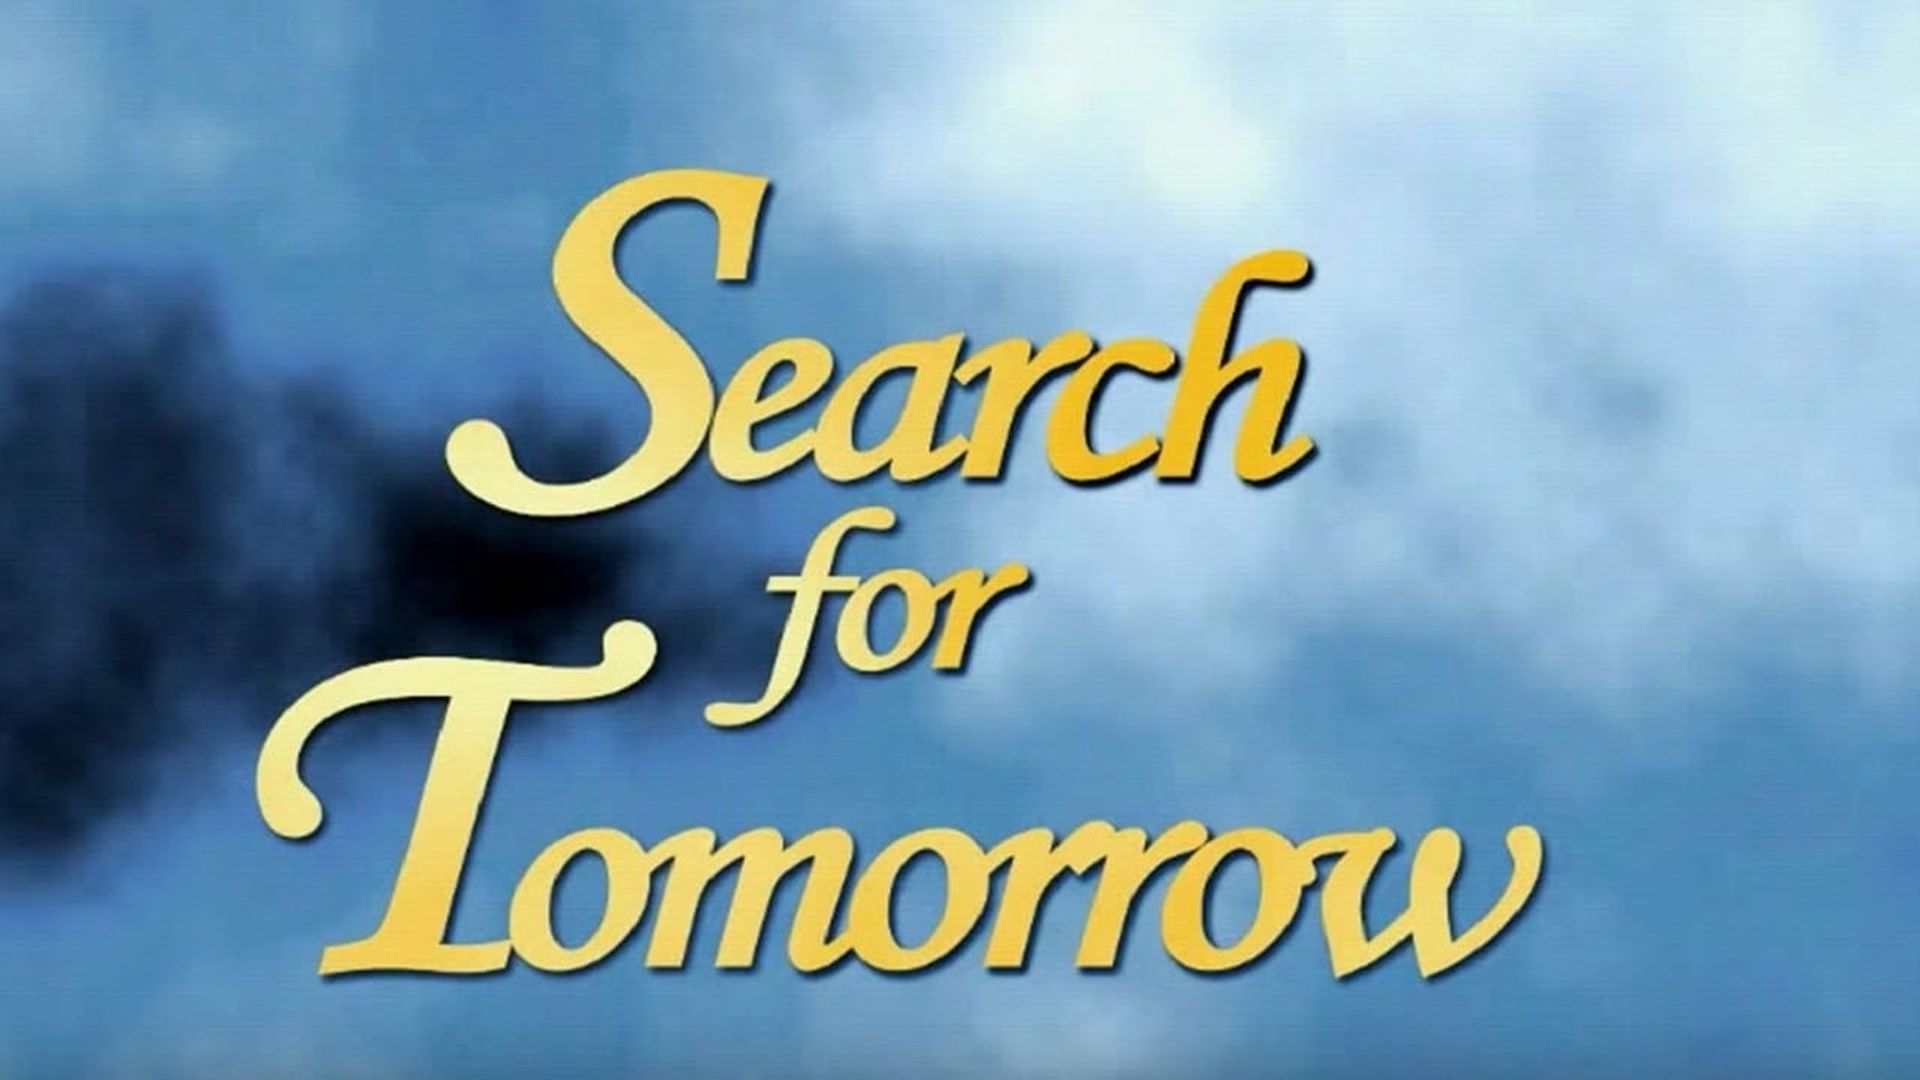 Search for Tomorrow background